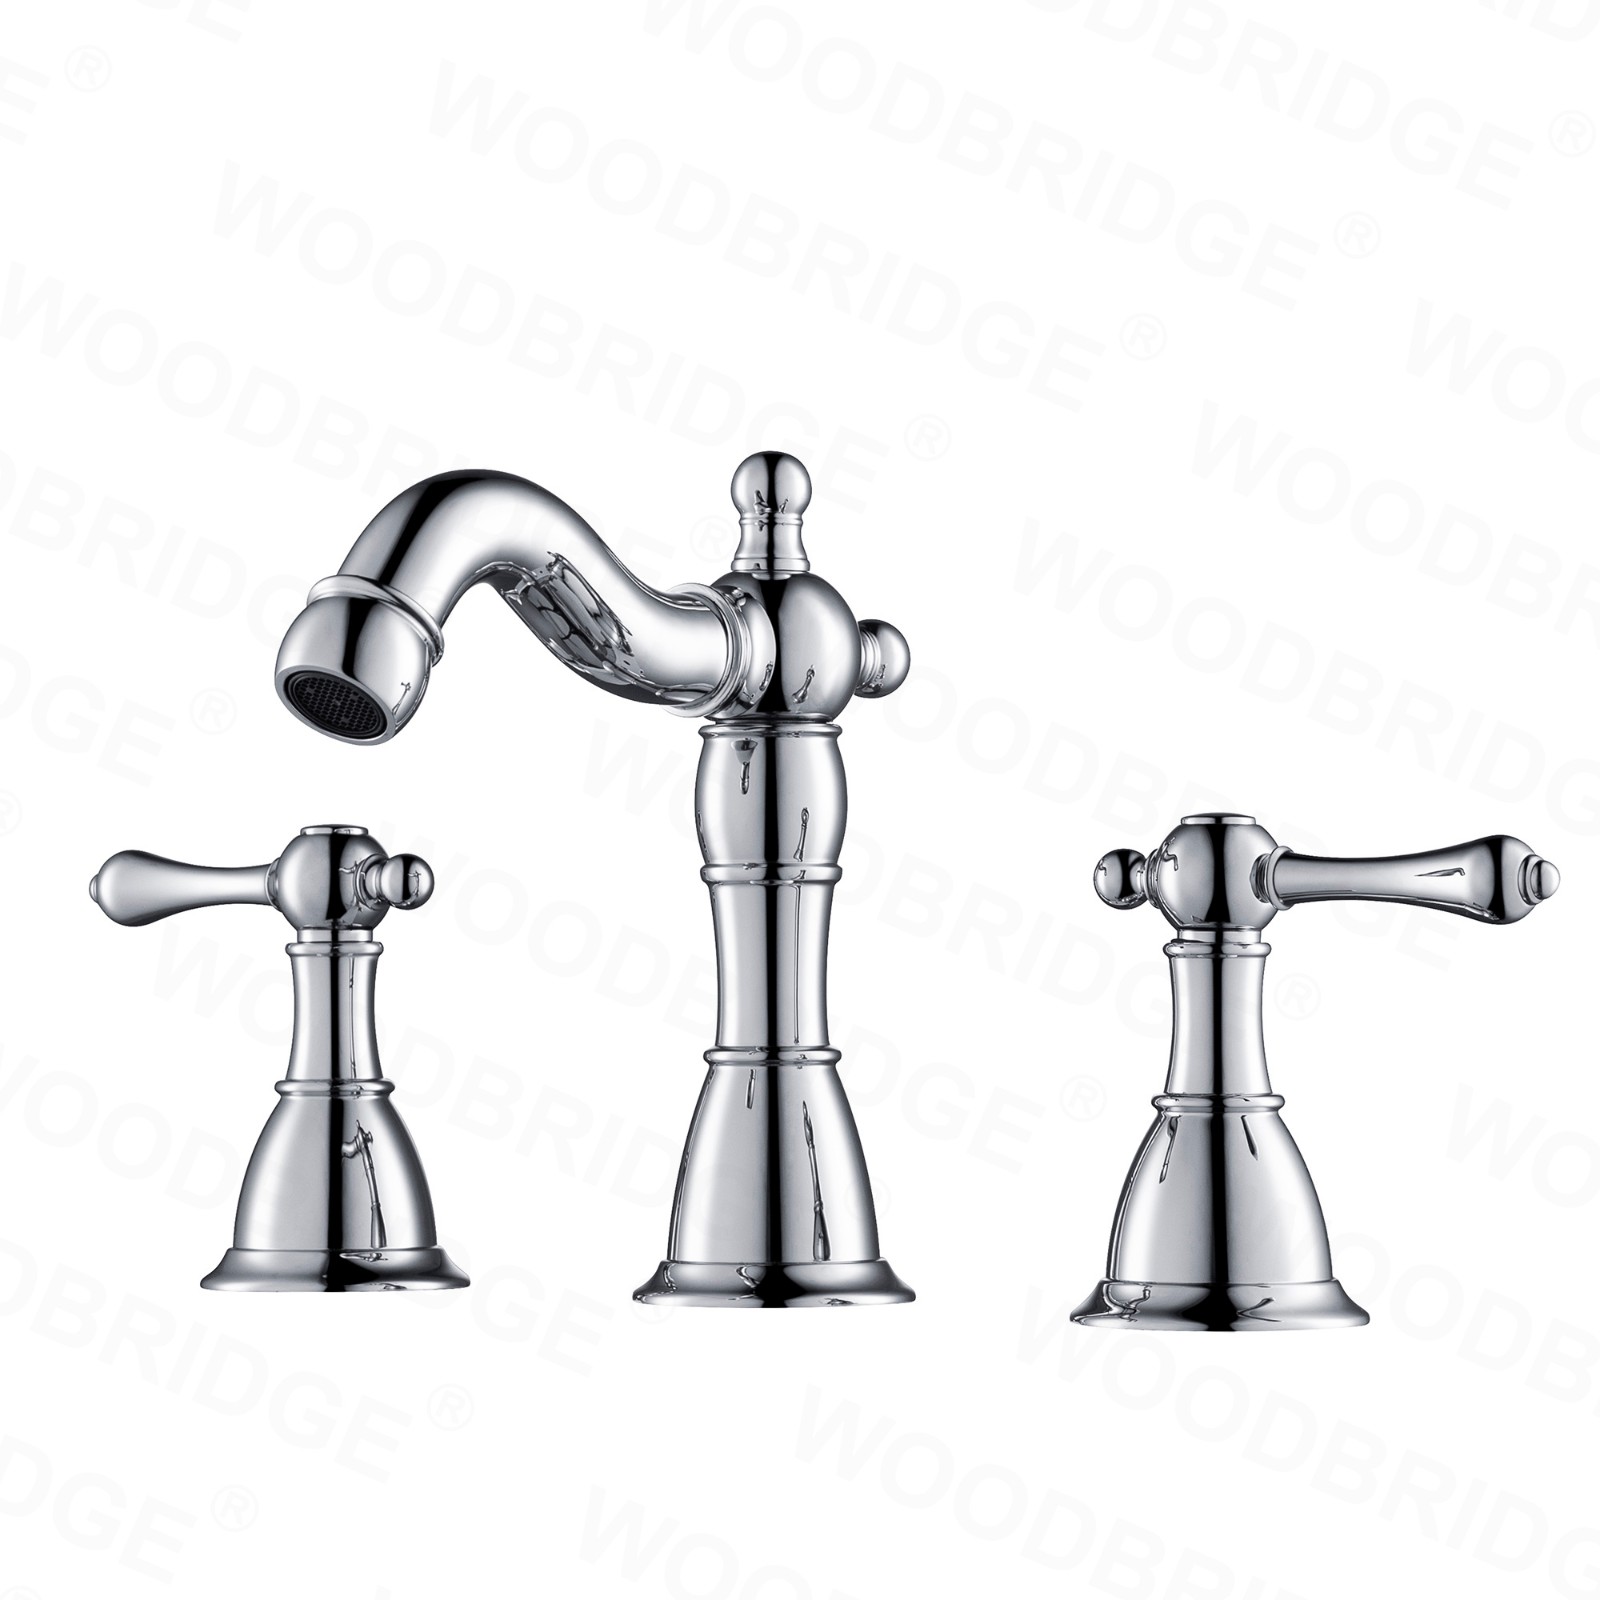  WOODBRIDGE WB802005CH 8-inch 3-hole Widespread Lavatory Faucet with Two Metal Lever Handle, Chrome_6326